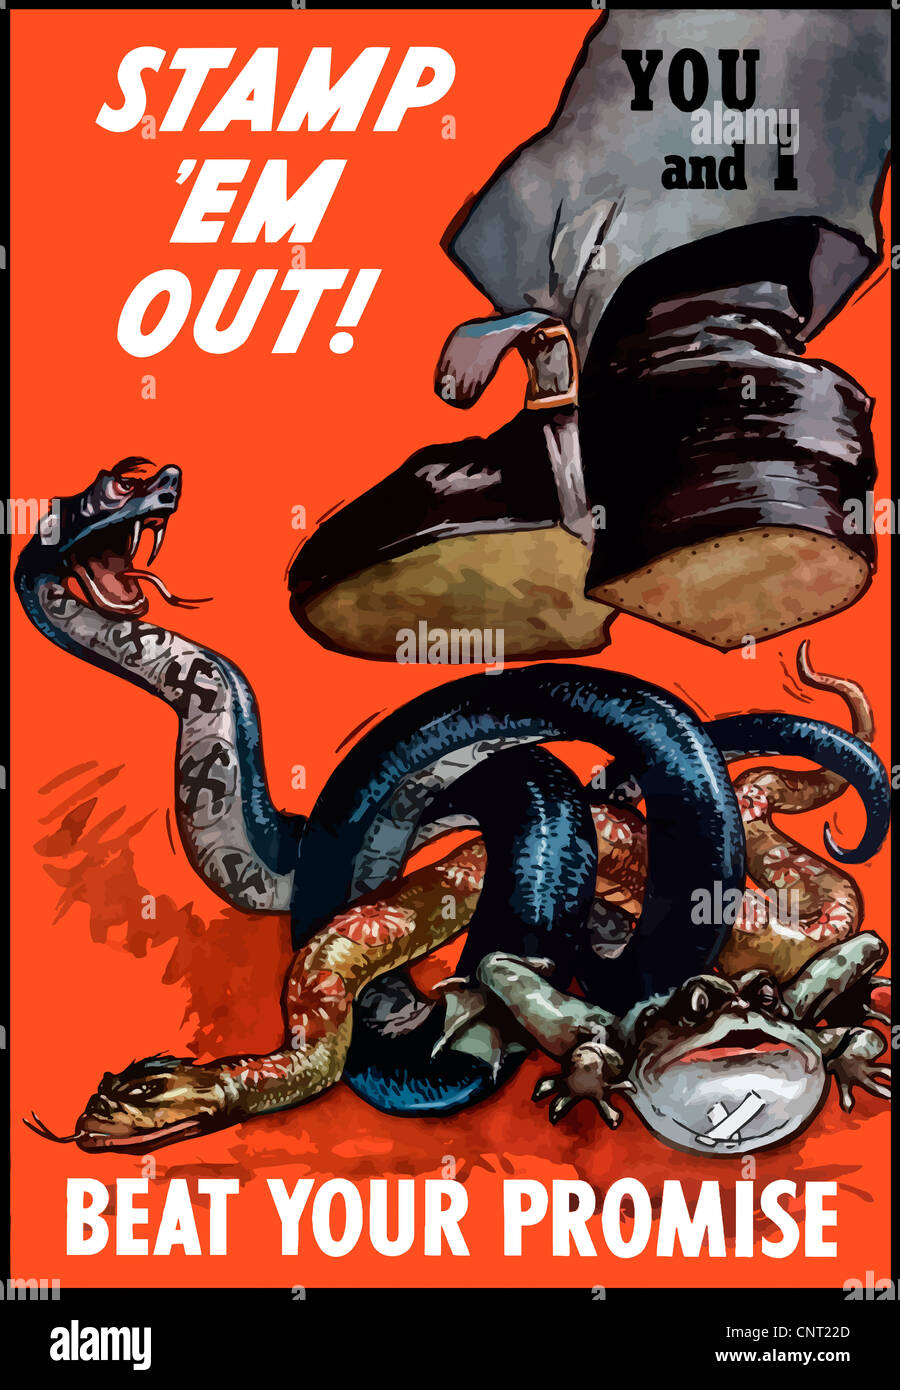 Vintage World War II poster of a boot labeled You and I stamping down on two snakes and a bullfrog representing Germany & Japan. Stock Photo